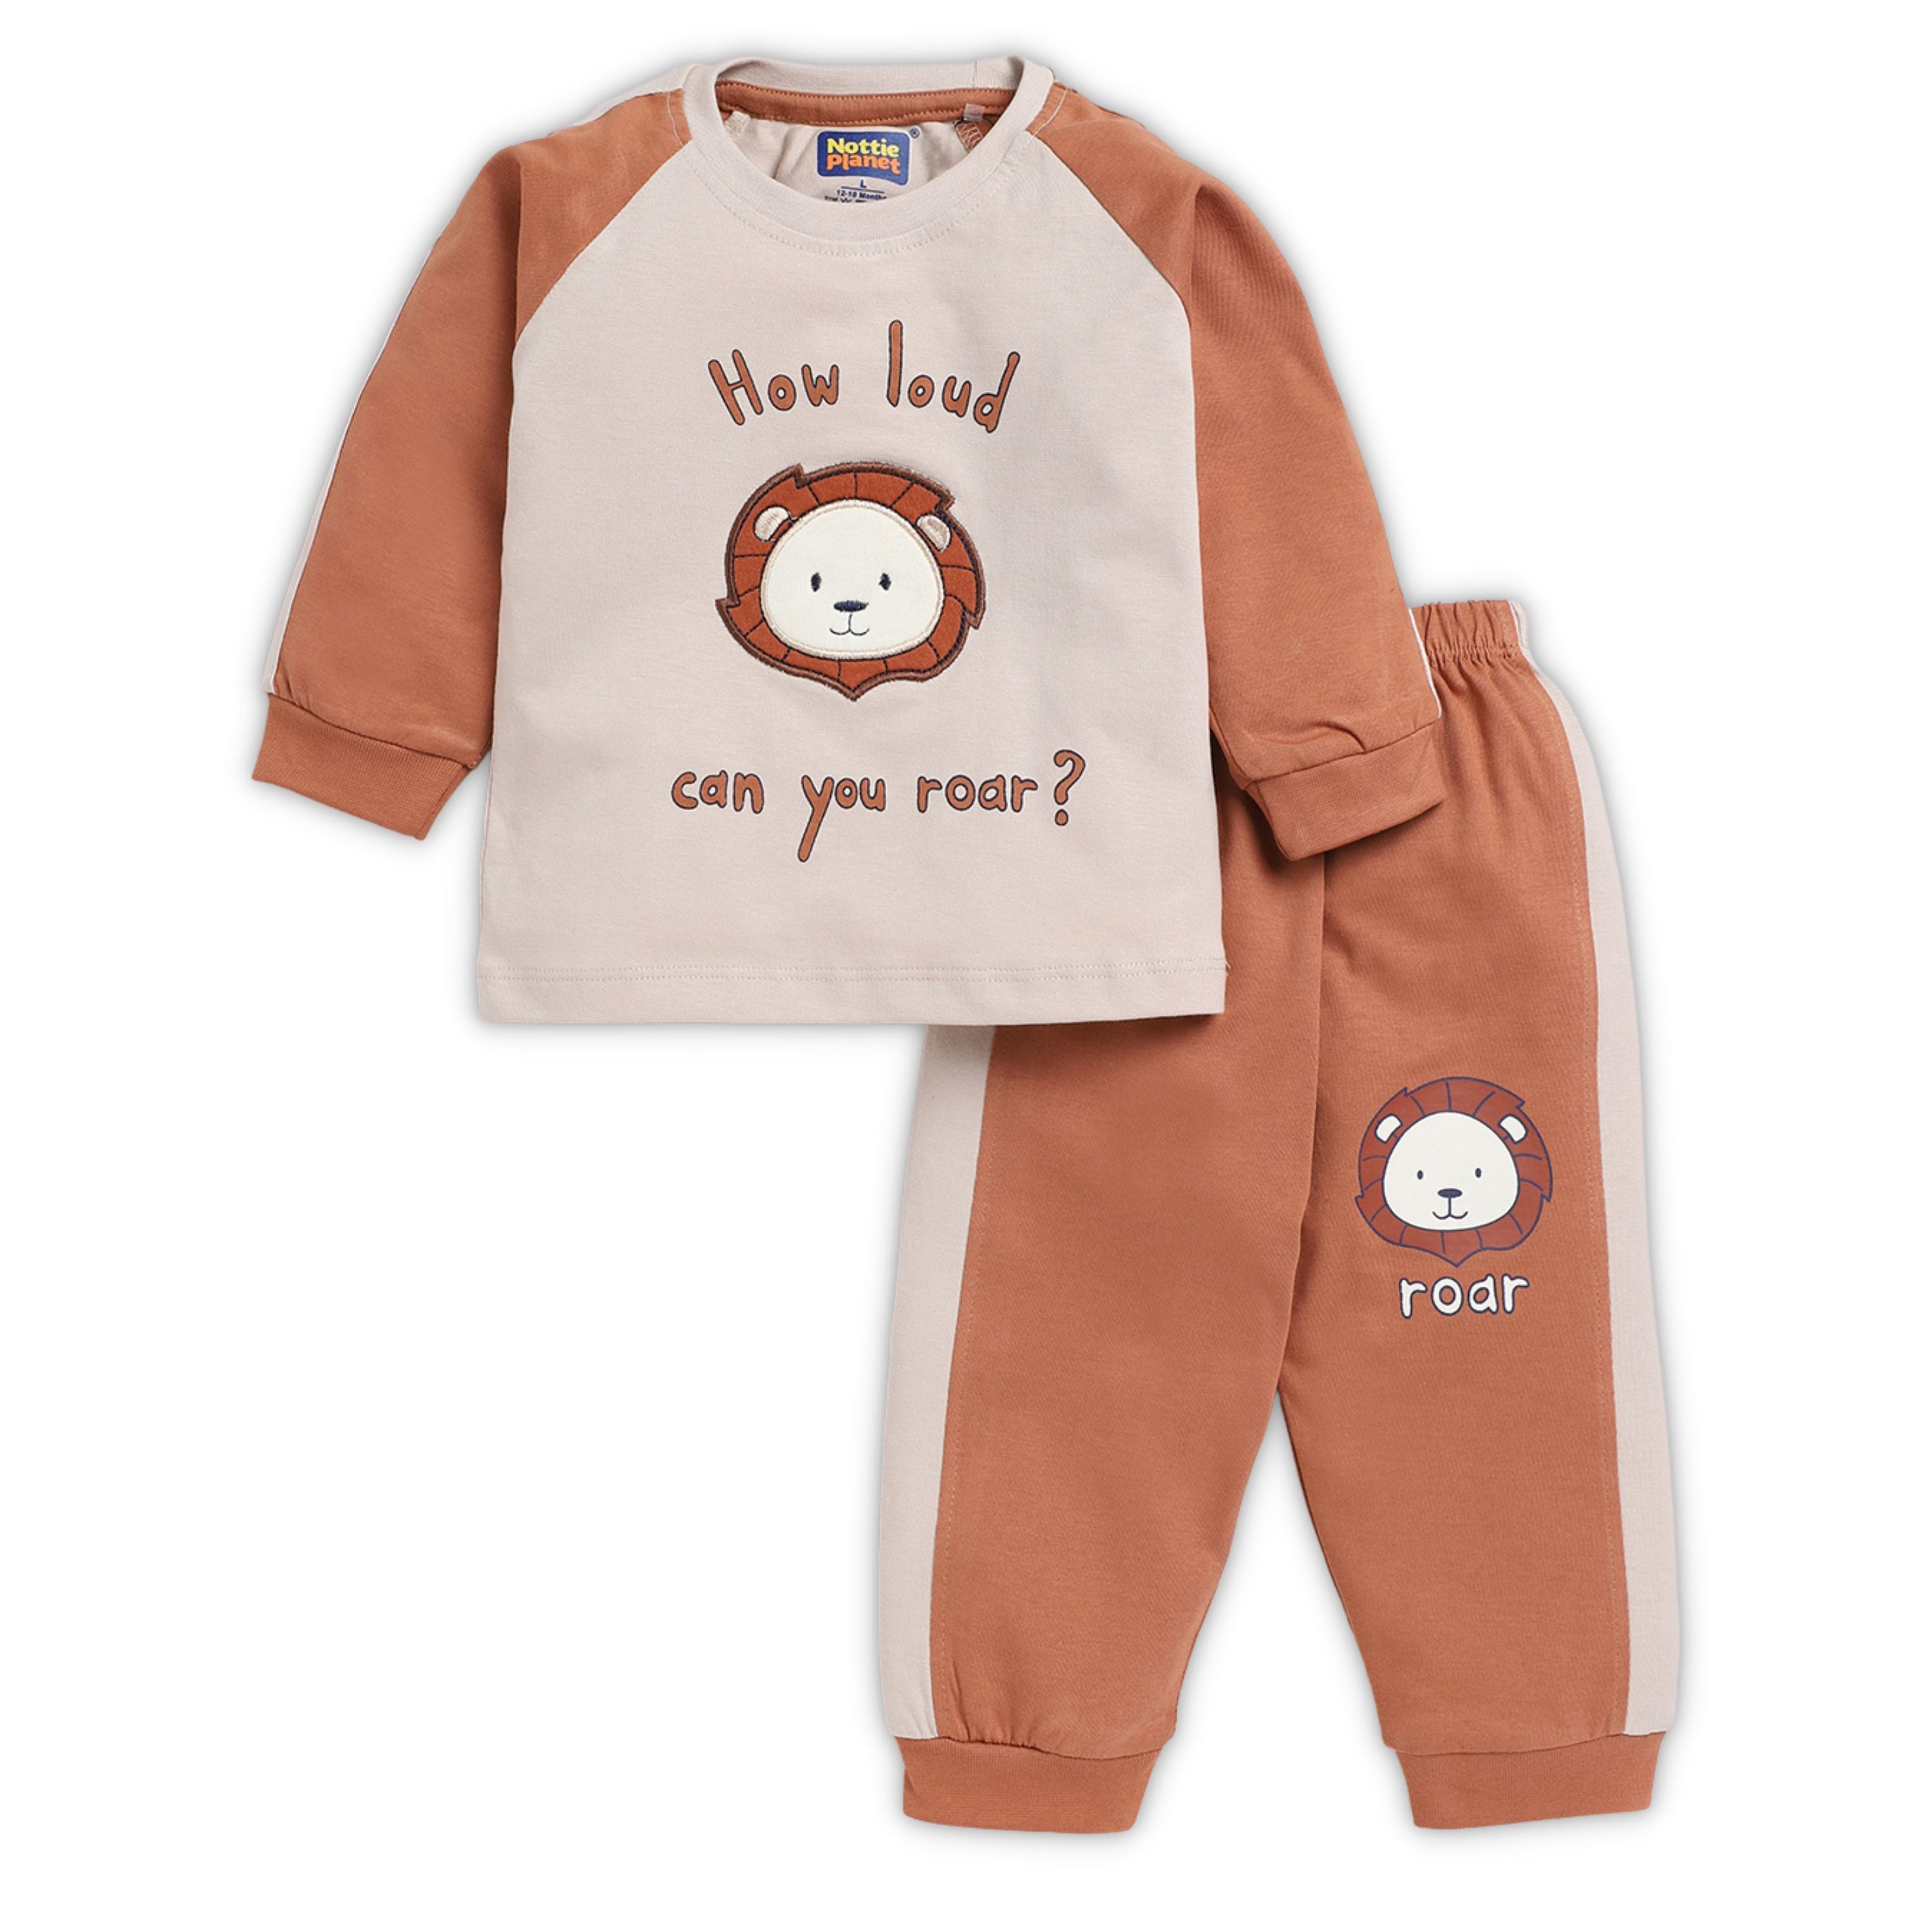 CLOTHING SET FOR BOY - BROWN